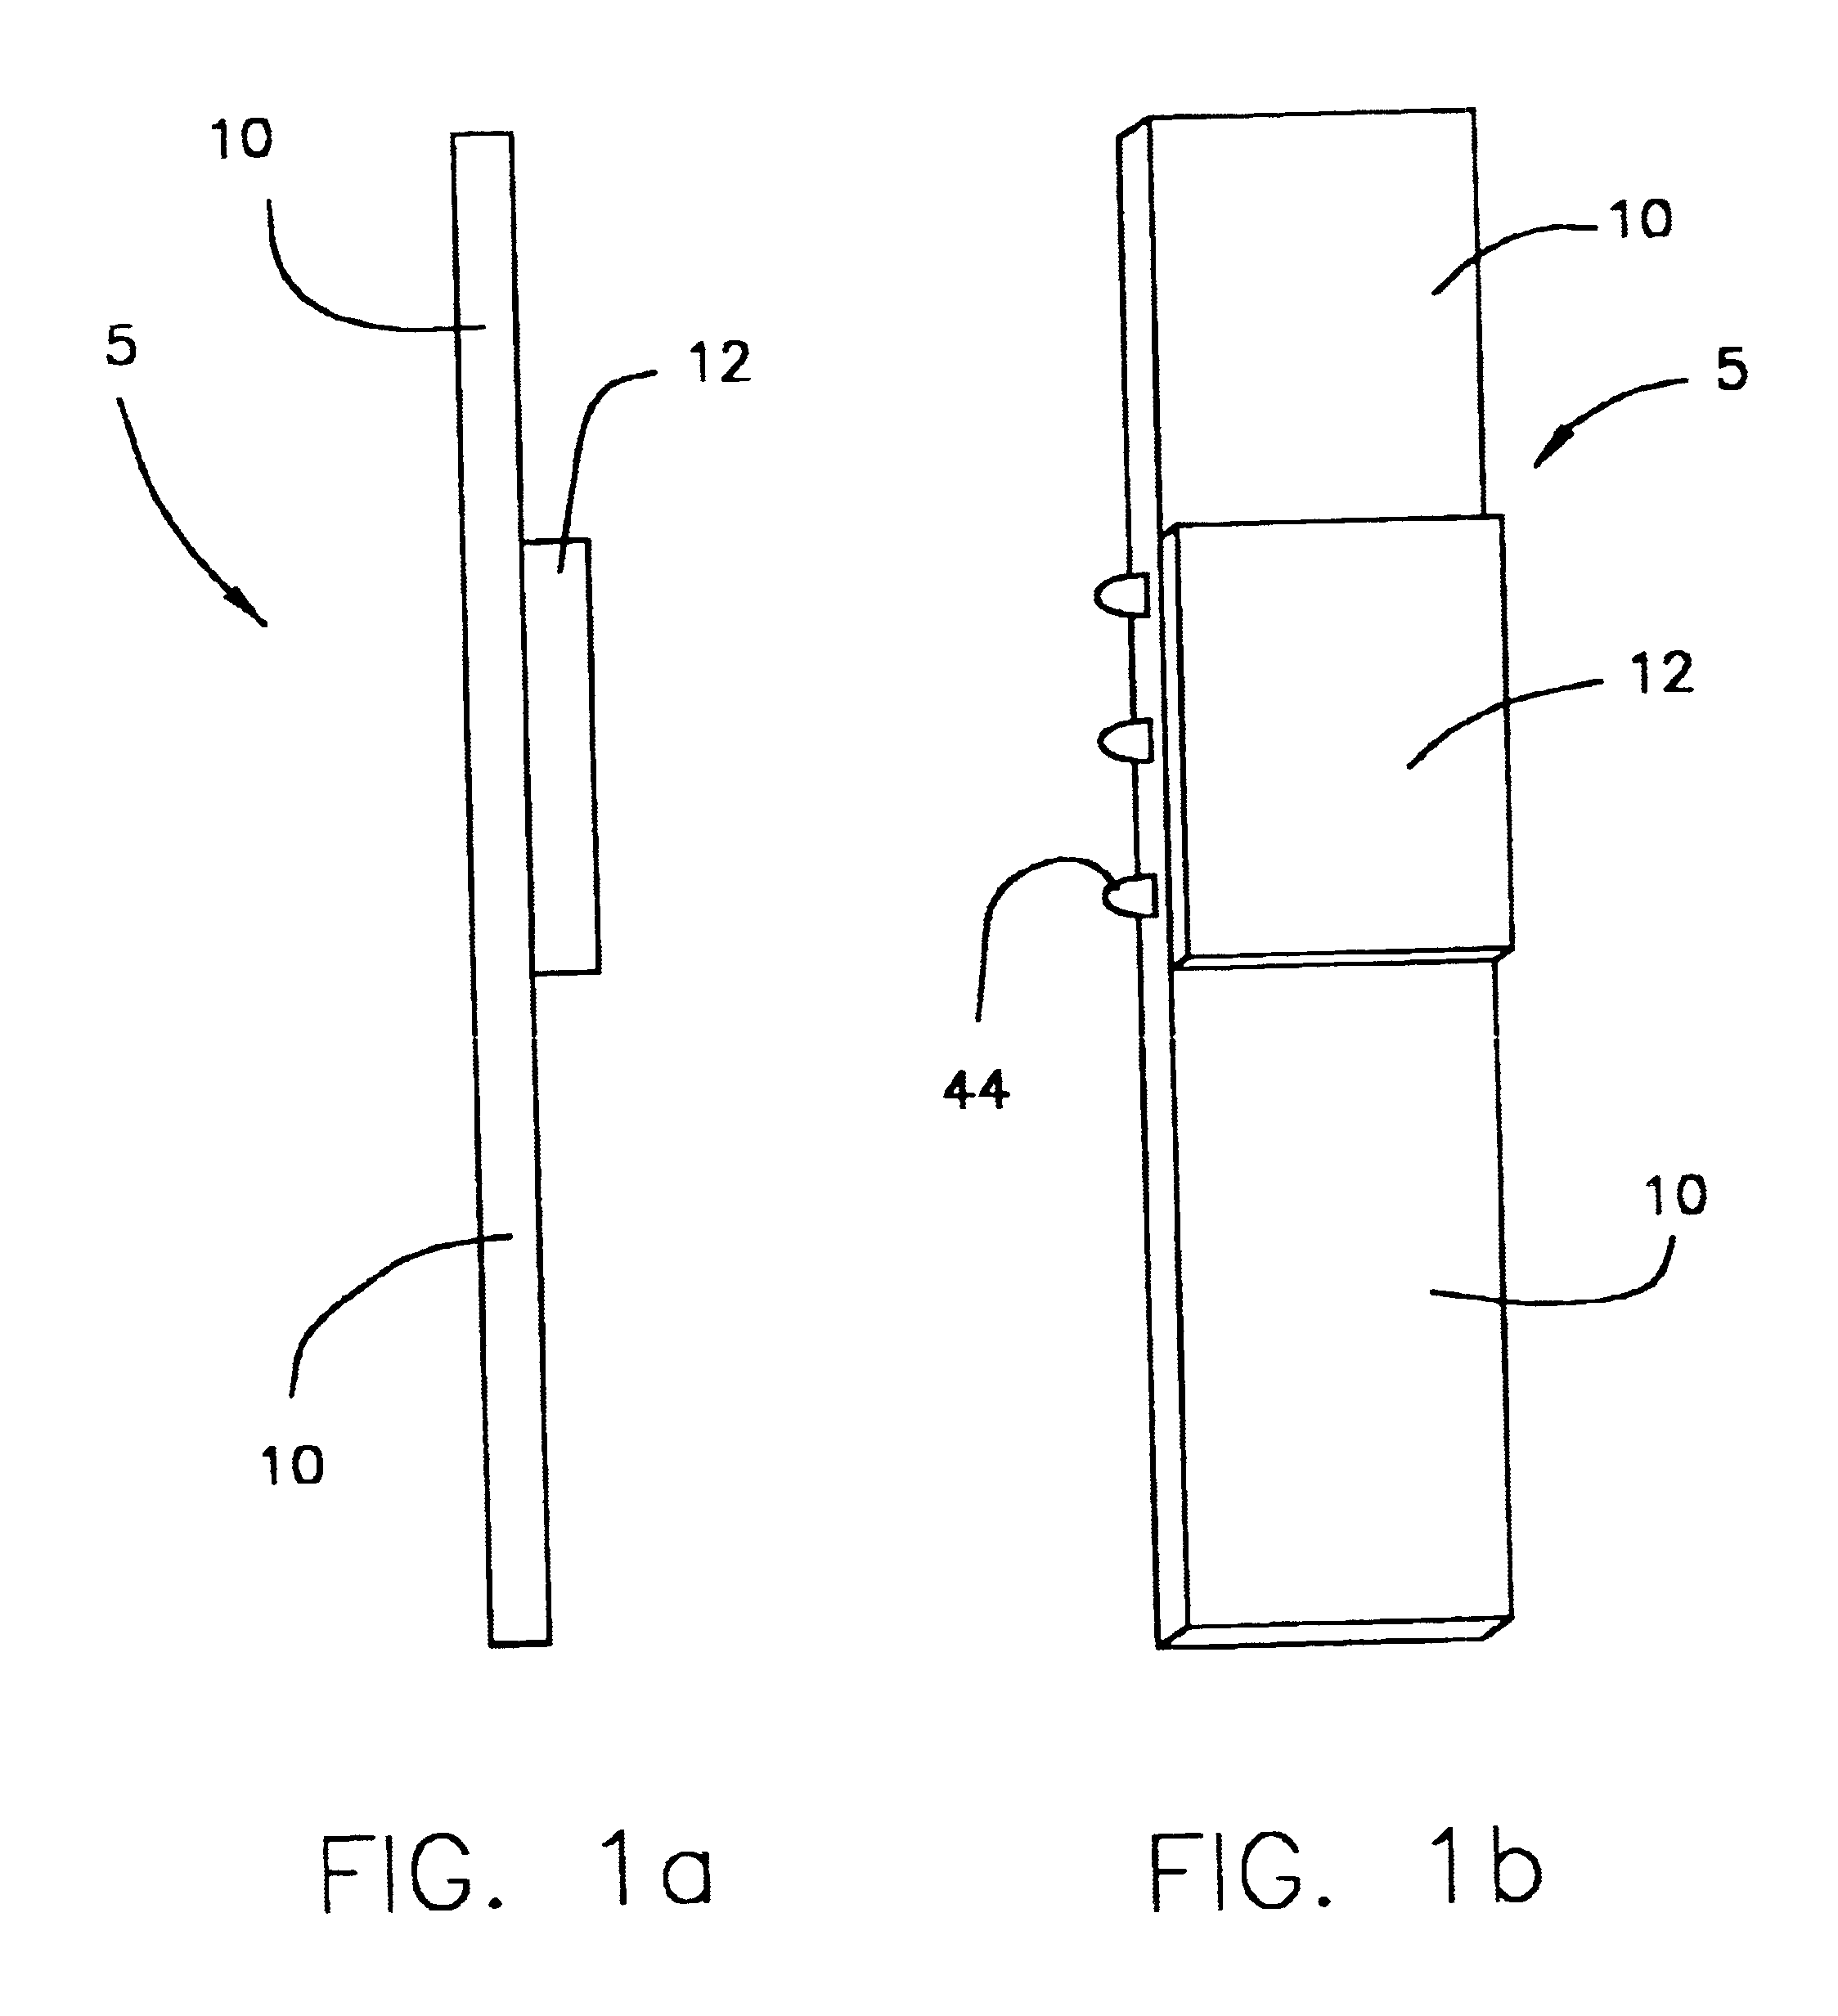 Antenna system for a wrist communication device